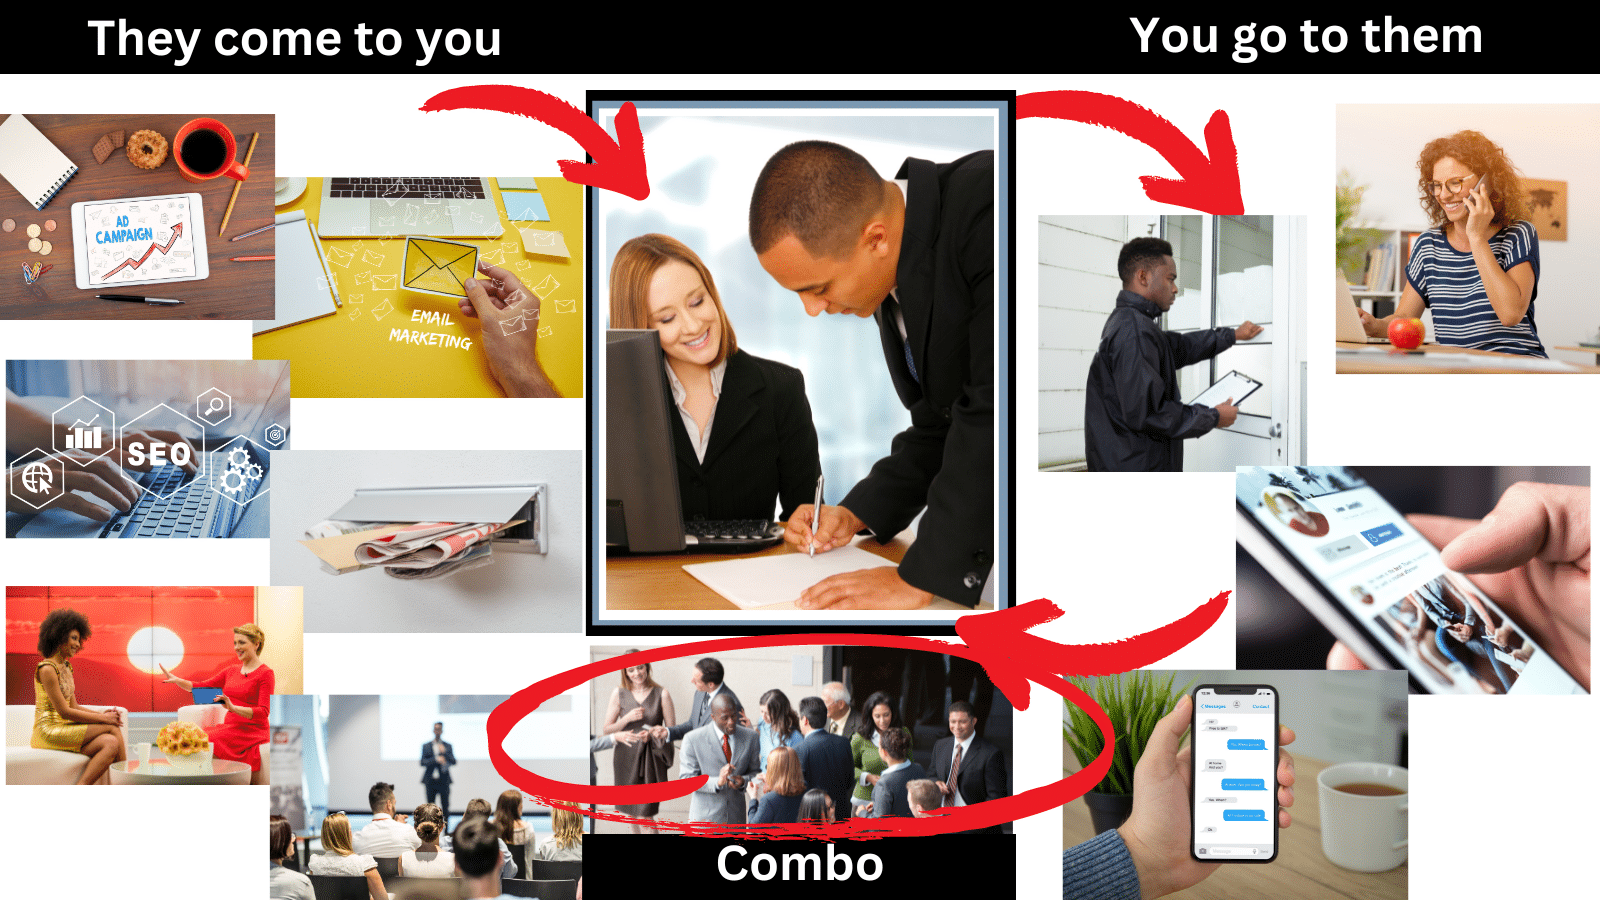 3 ways to get business - They come to you vs. You go to them or combo